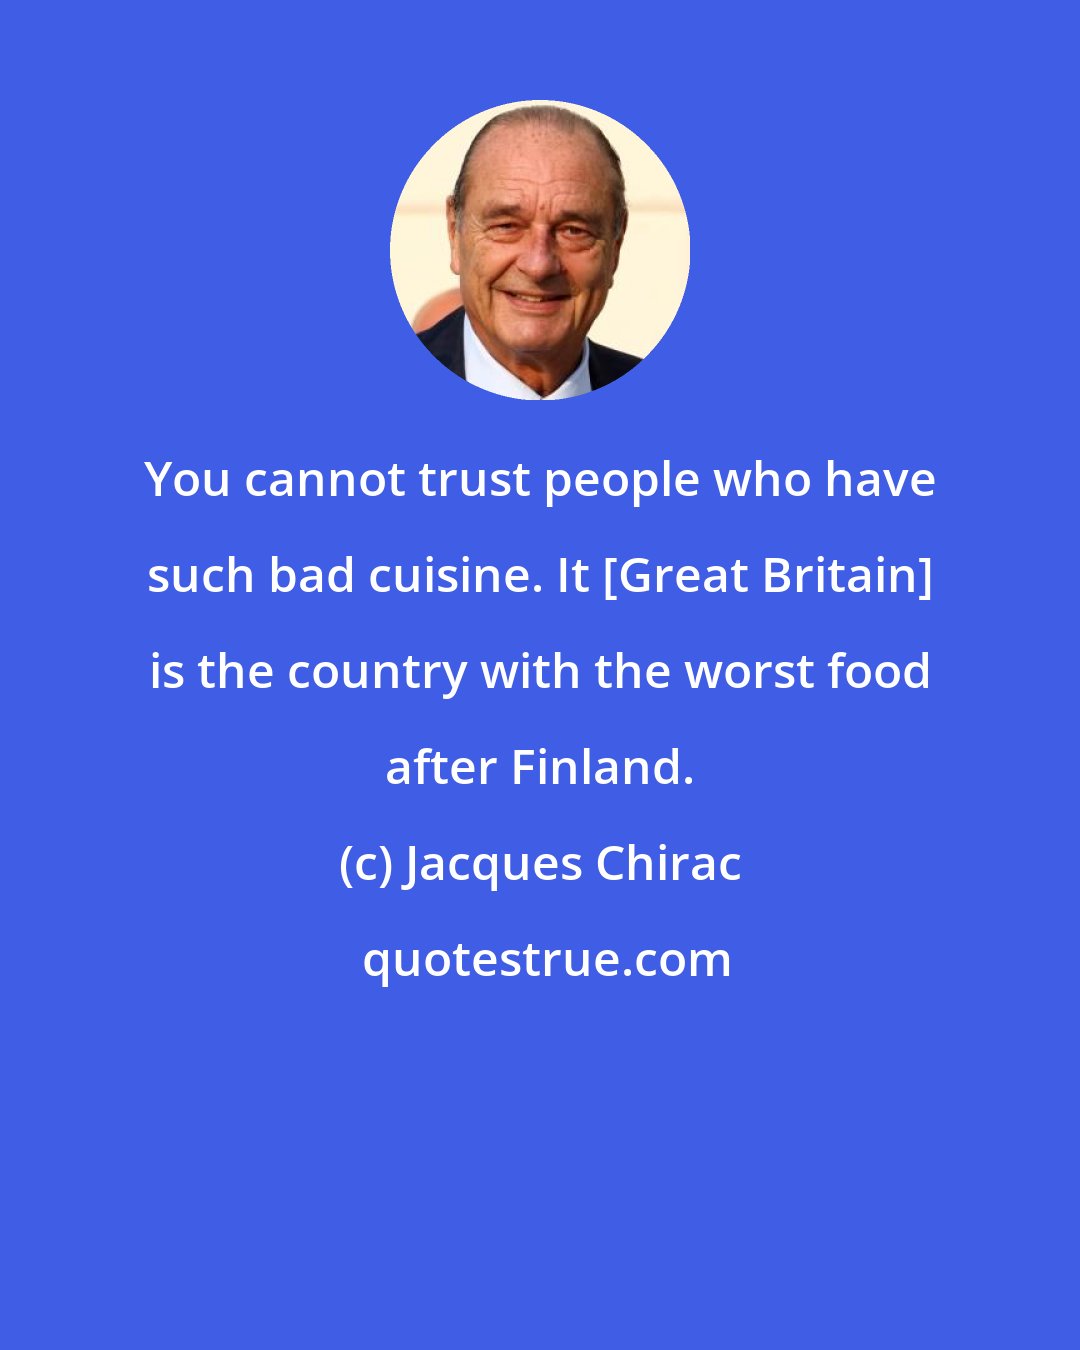 Jacques Chirac: You cannot trust people who have such bad cuisine. It [Great Britain] is the country with the worst food after Finland.